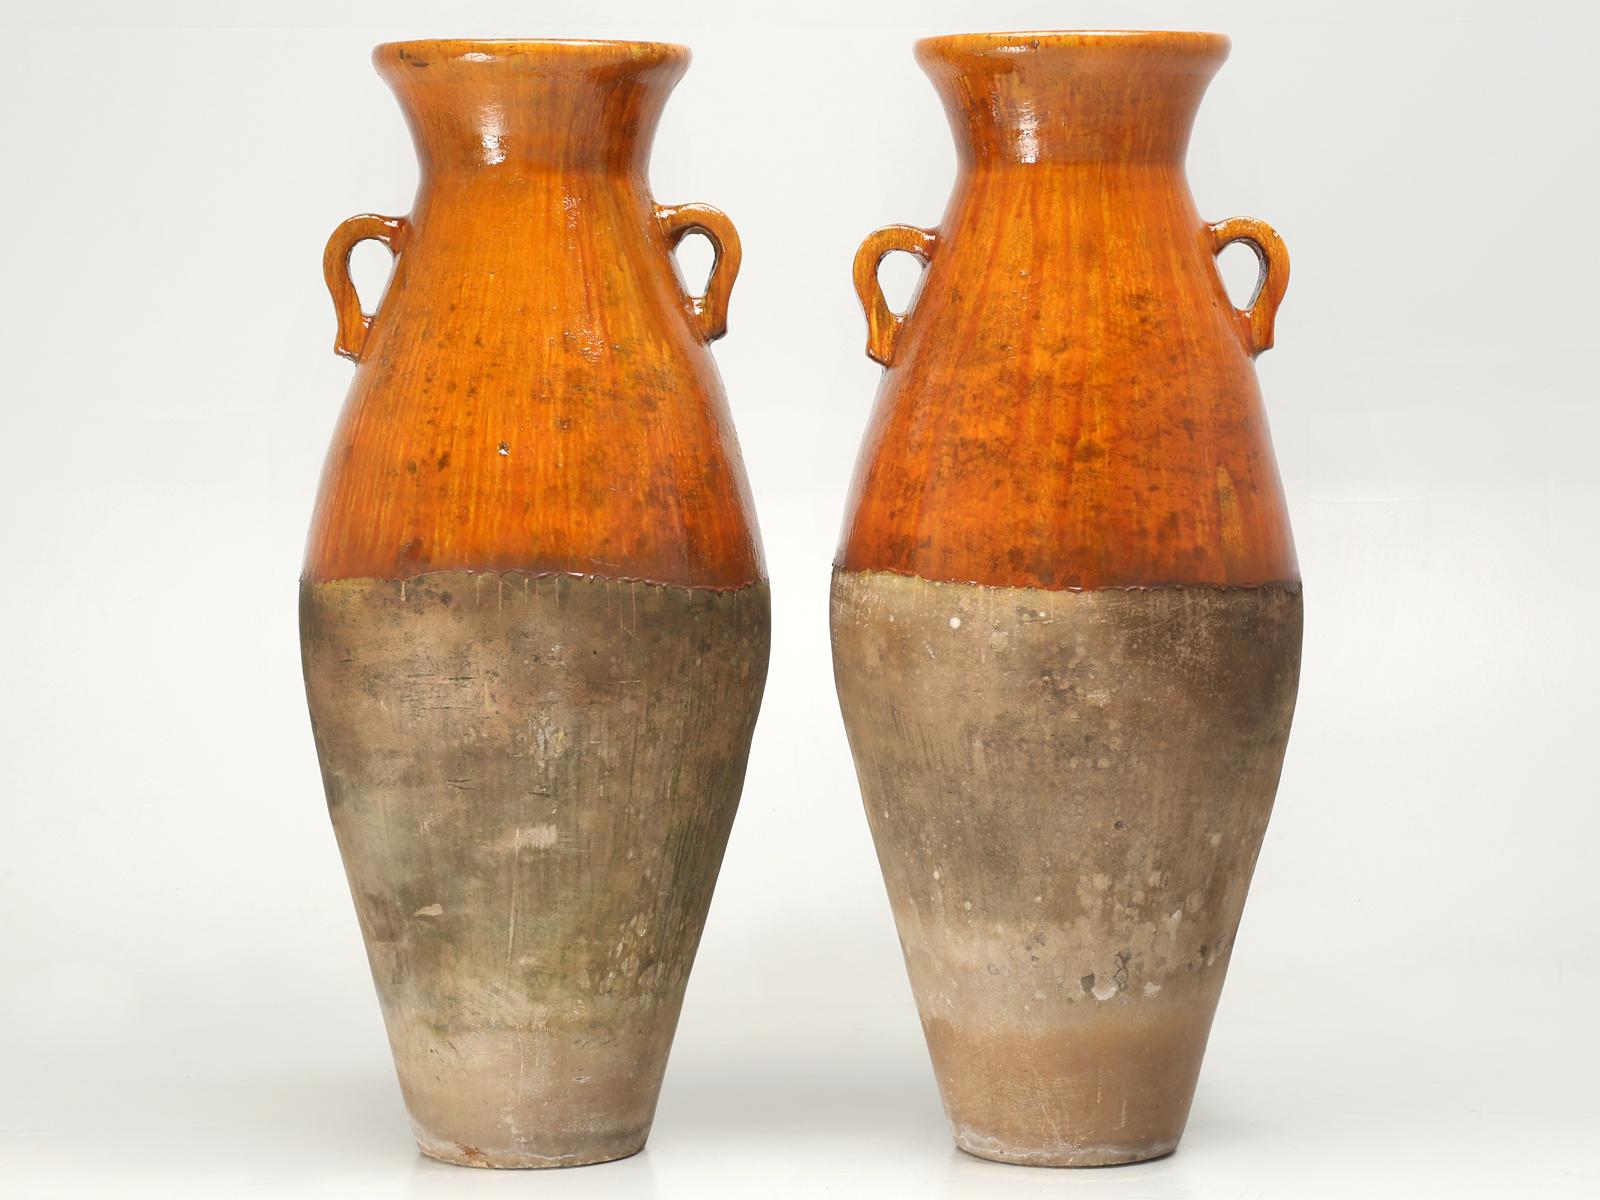 Hand-Crafted Pair of Antique Greek Olive Oil or Wine Amphora's